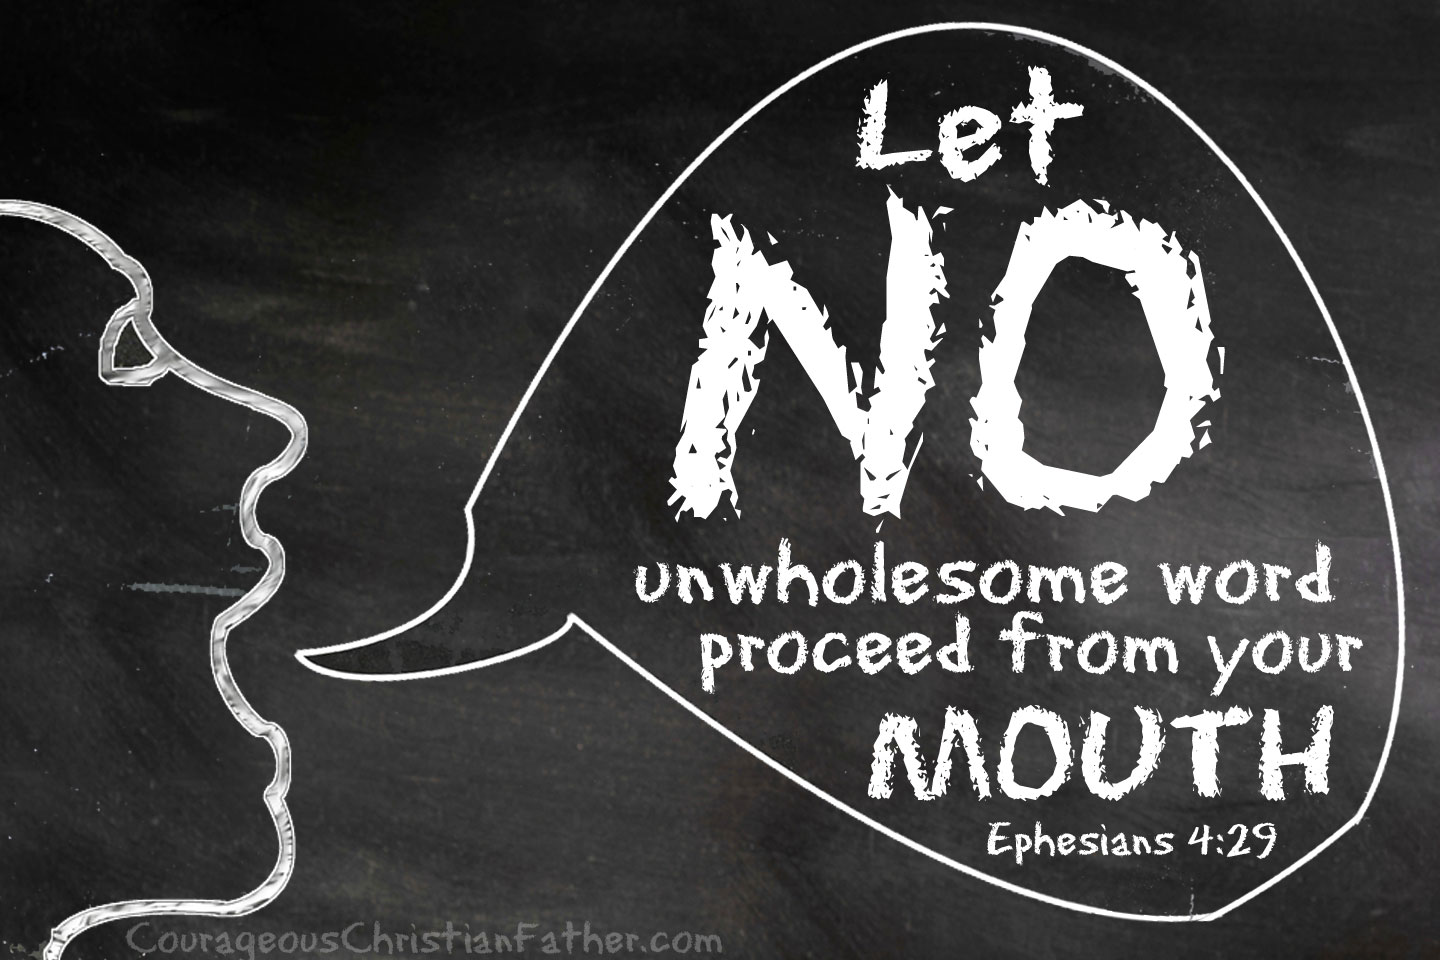 VOTD October 19, 2019 - Let no unwholesome word proceed from your mouth, but only such a word as is good for edification according to the need of the moment, so that it will give grace to those who hear. Ephesians 4:29 NASB